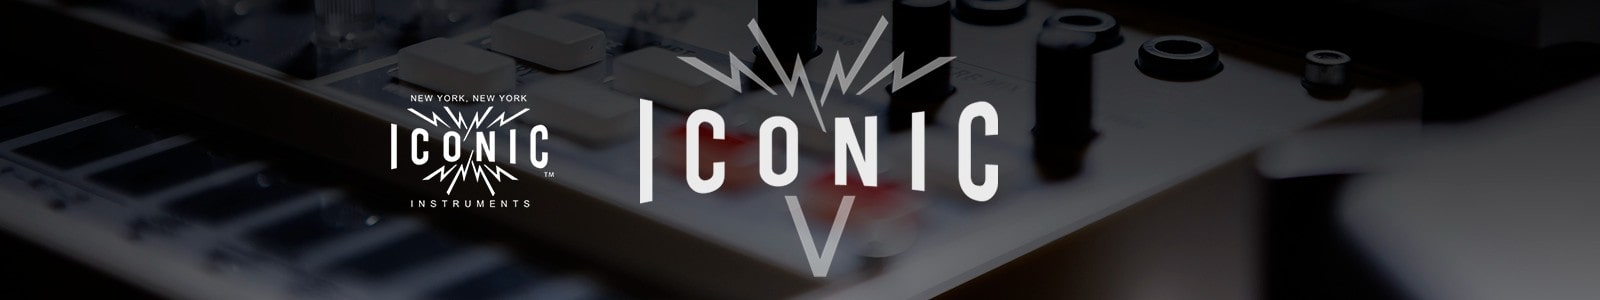 Iconic V by Iconic Instruments